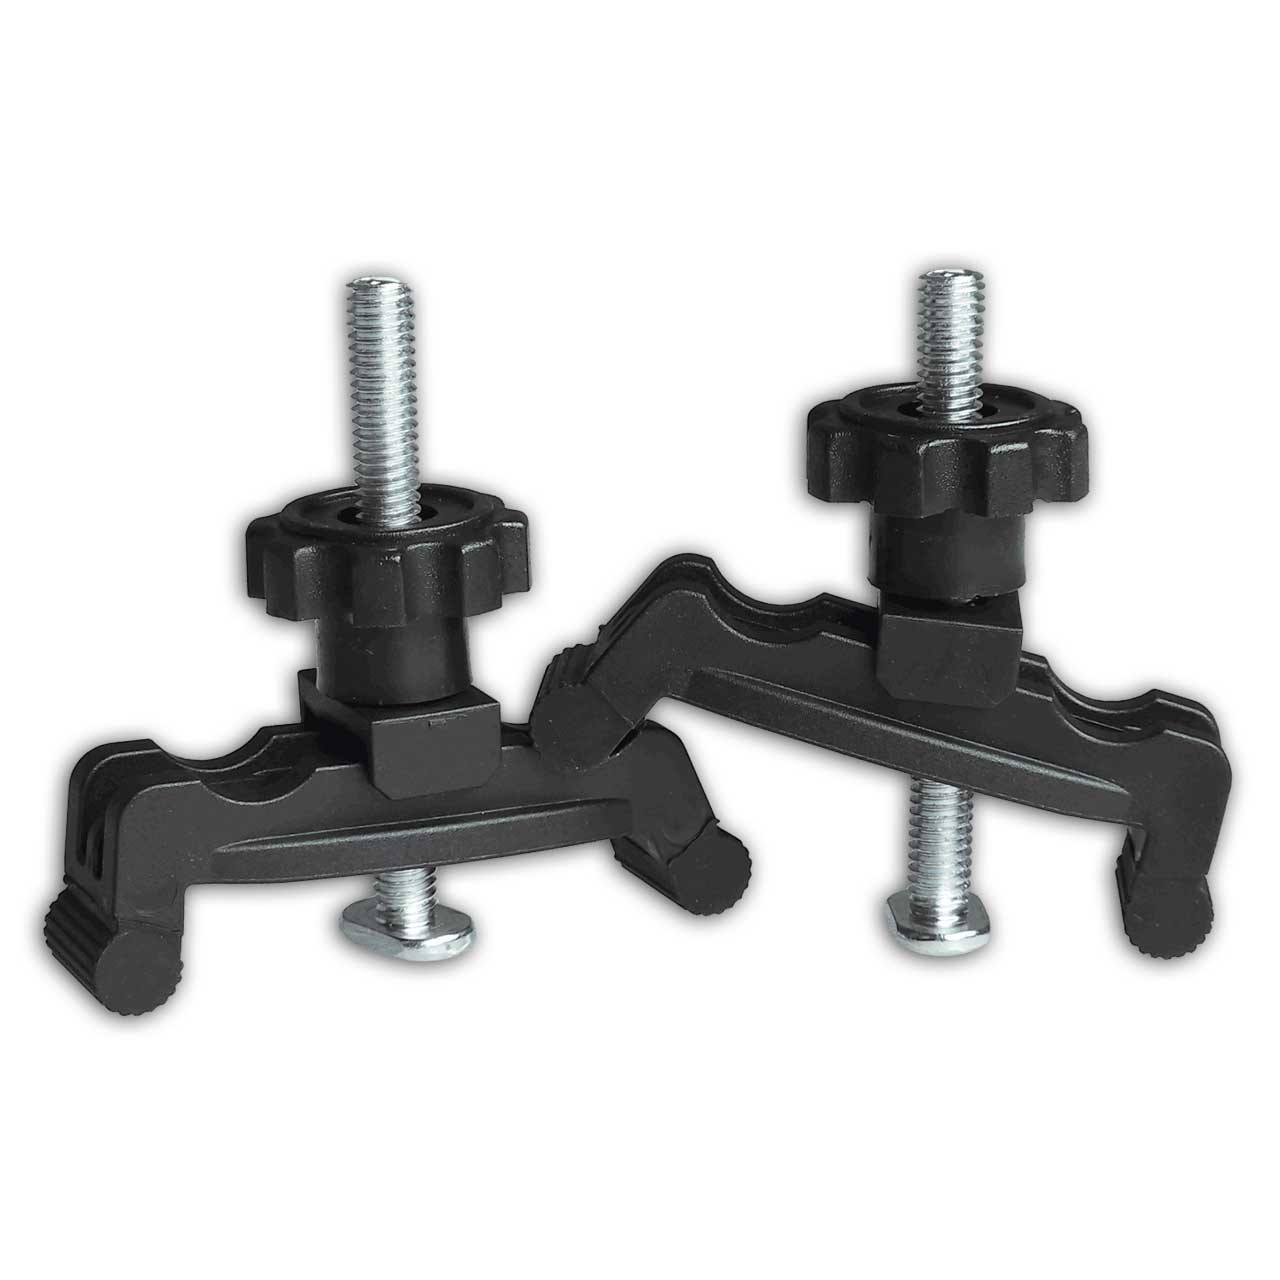 Bit Saver Hold Down Clamps / Next Wave 2pk